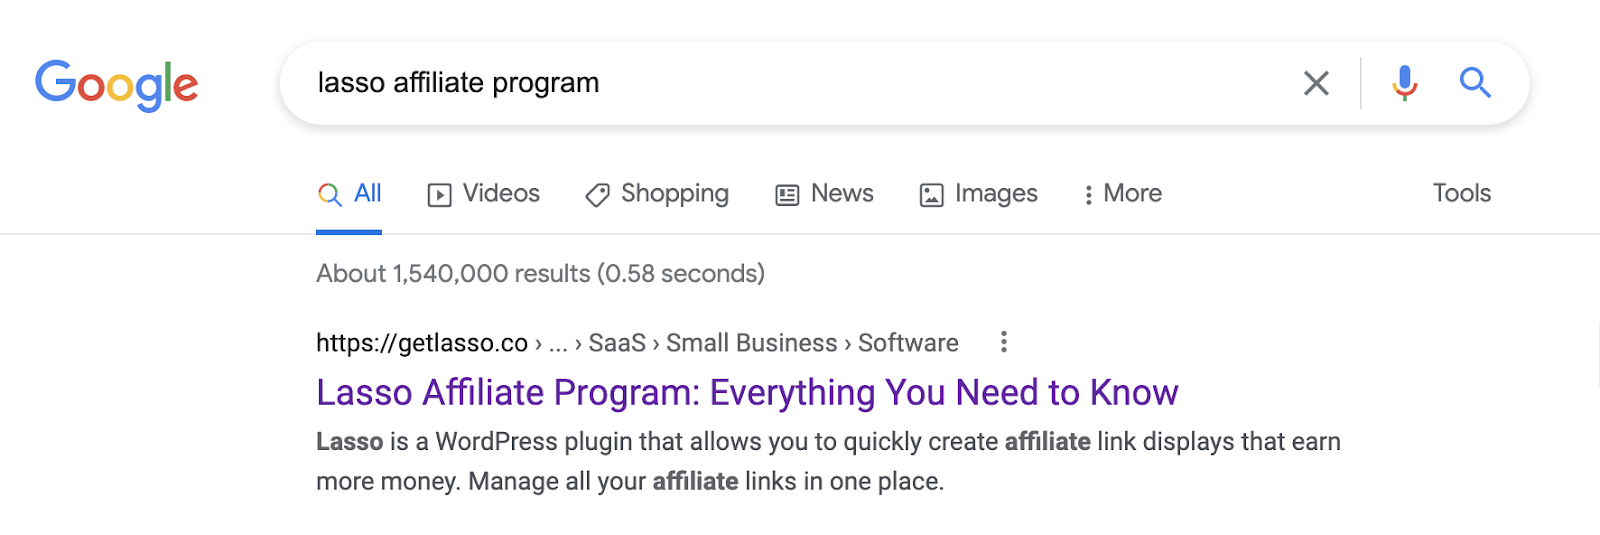 search engines results for lasso affiliate program